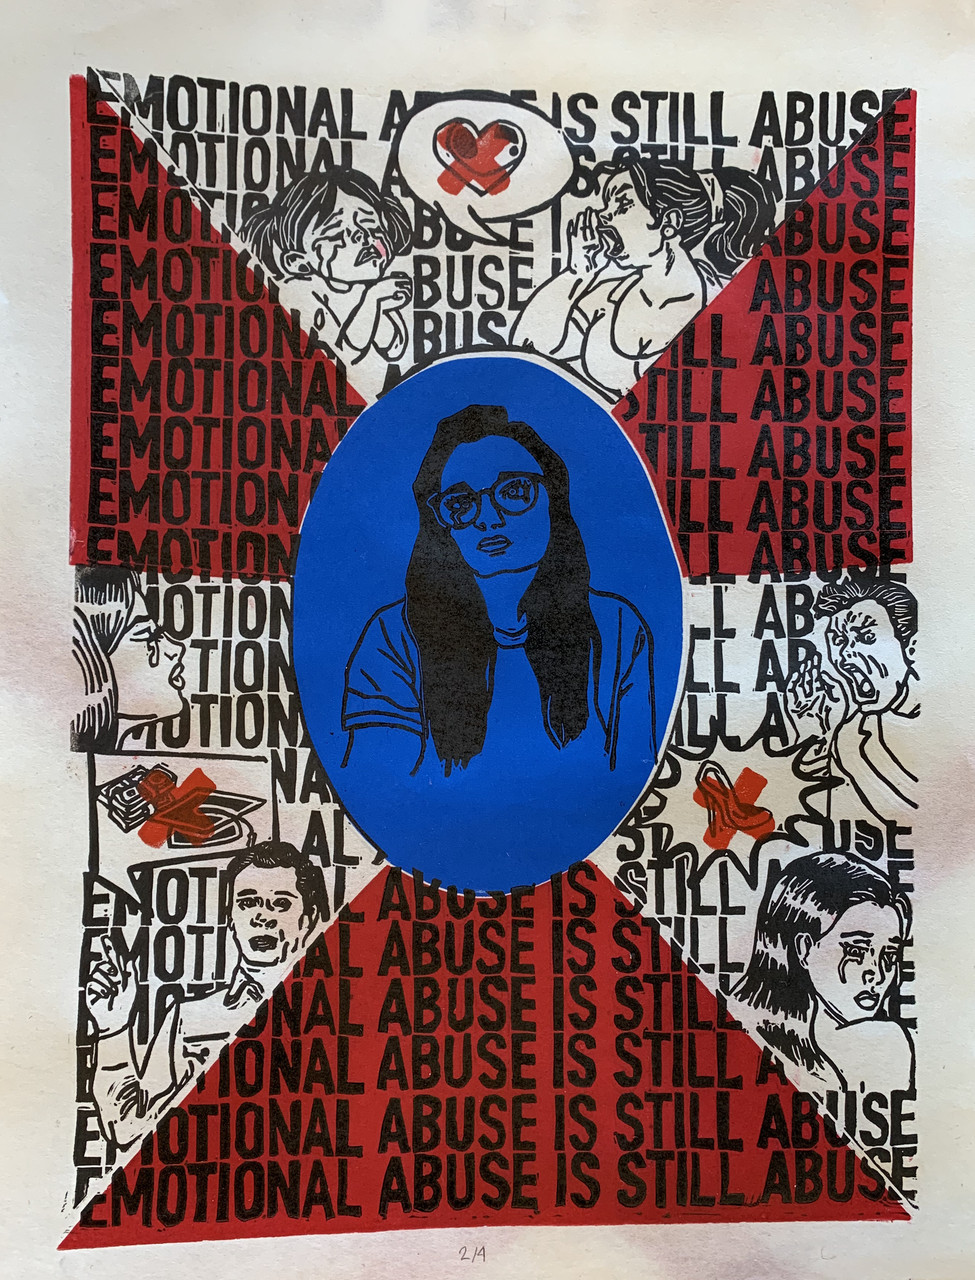 A crying girl on a blue background is surrounded by the words "emotional abuse is still abuse" and three illustrations of emotional abuse